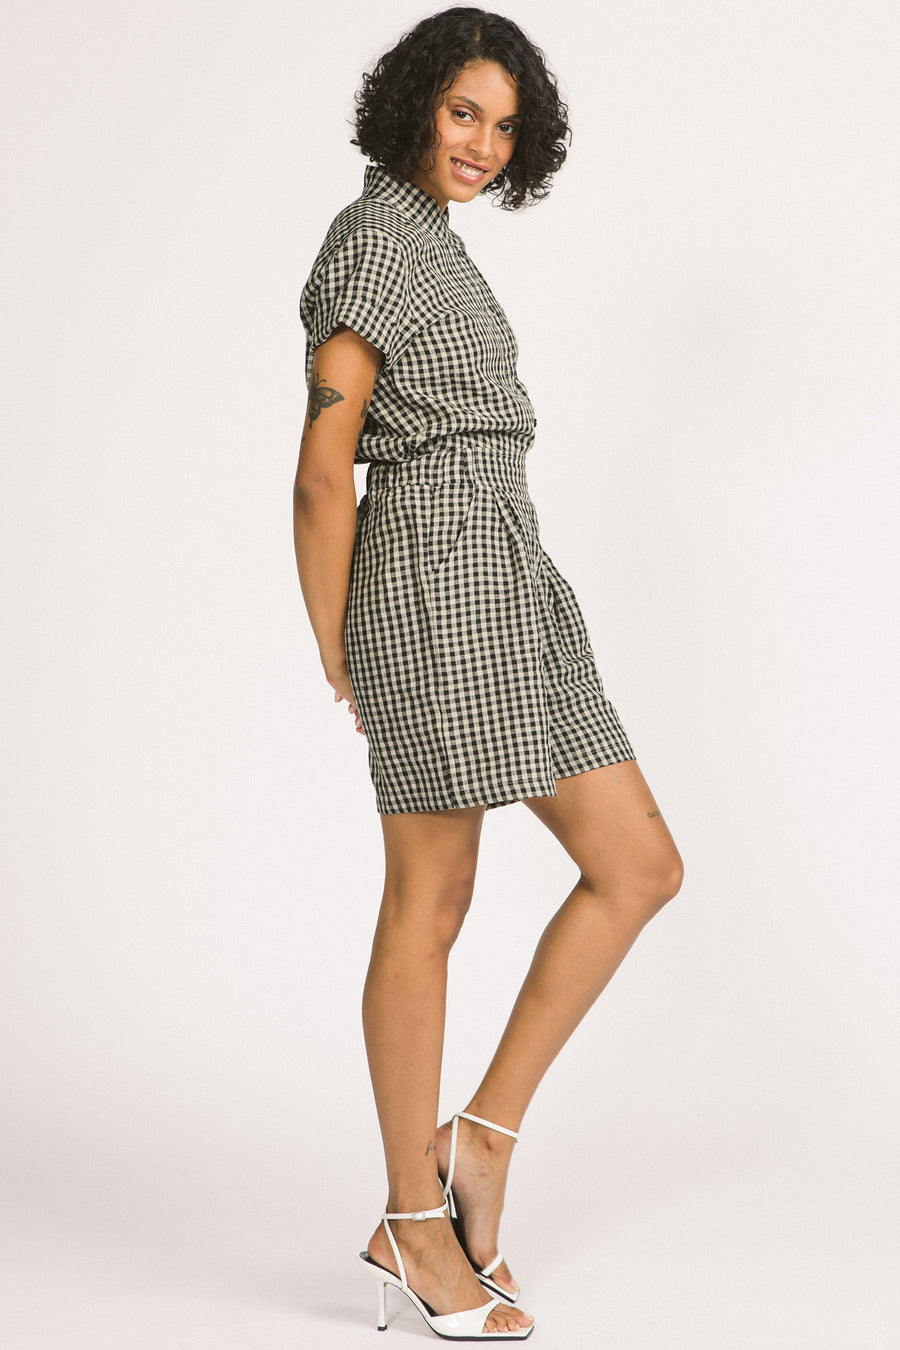 Side view of woman wearing black and white gingham Kim shorts by Allison Wonderland. 